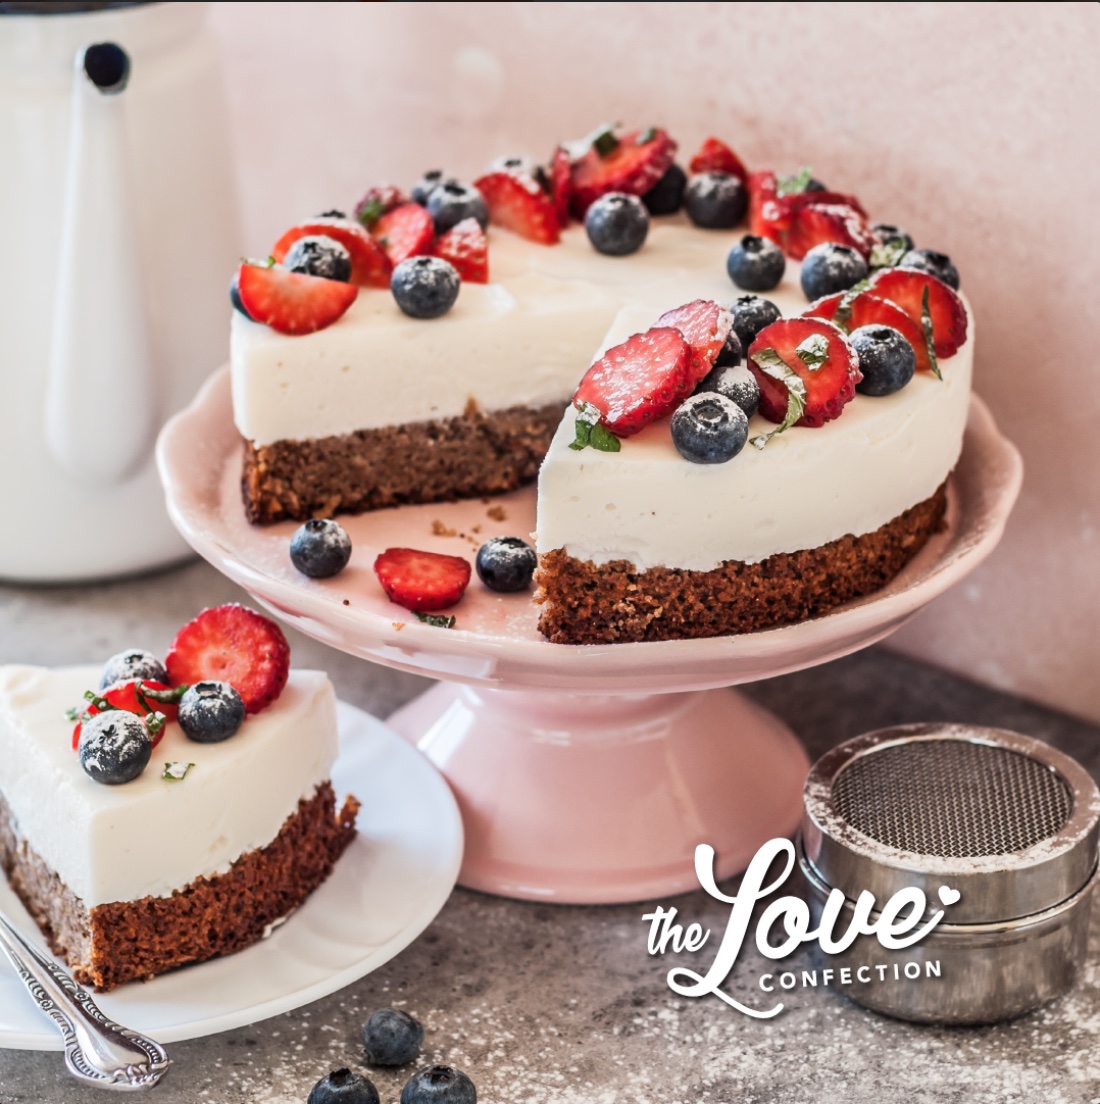 The Love Confection Bakery